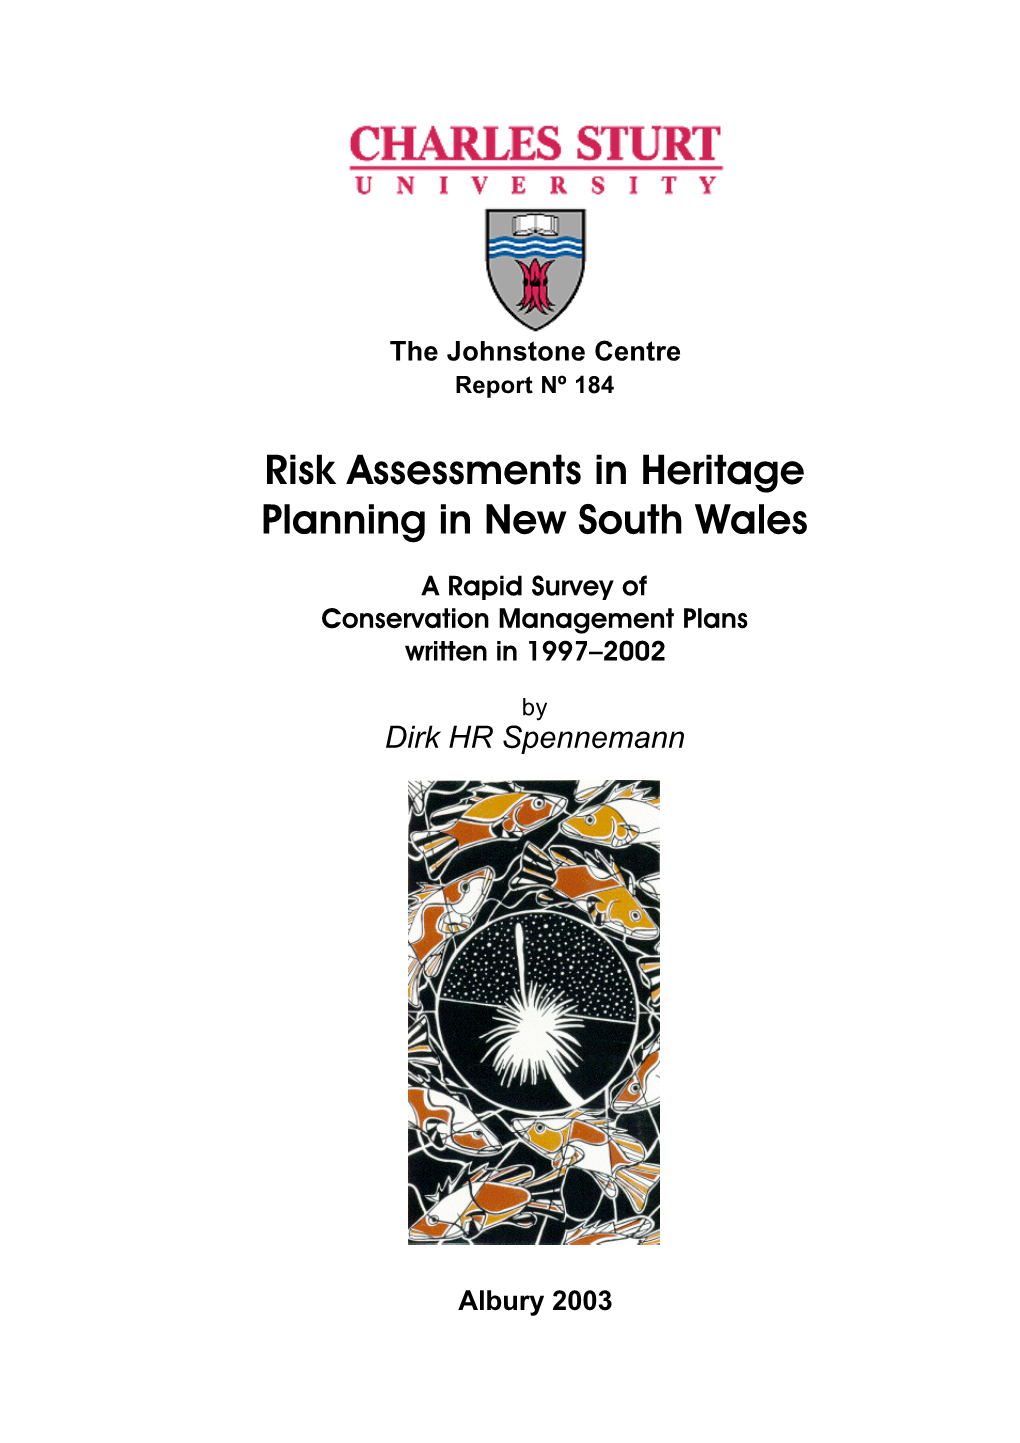 Risk Assessments in Heritage Planning in New South Wales